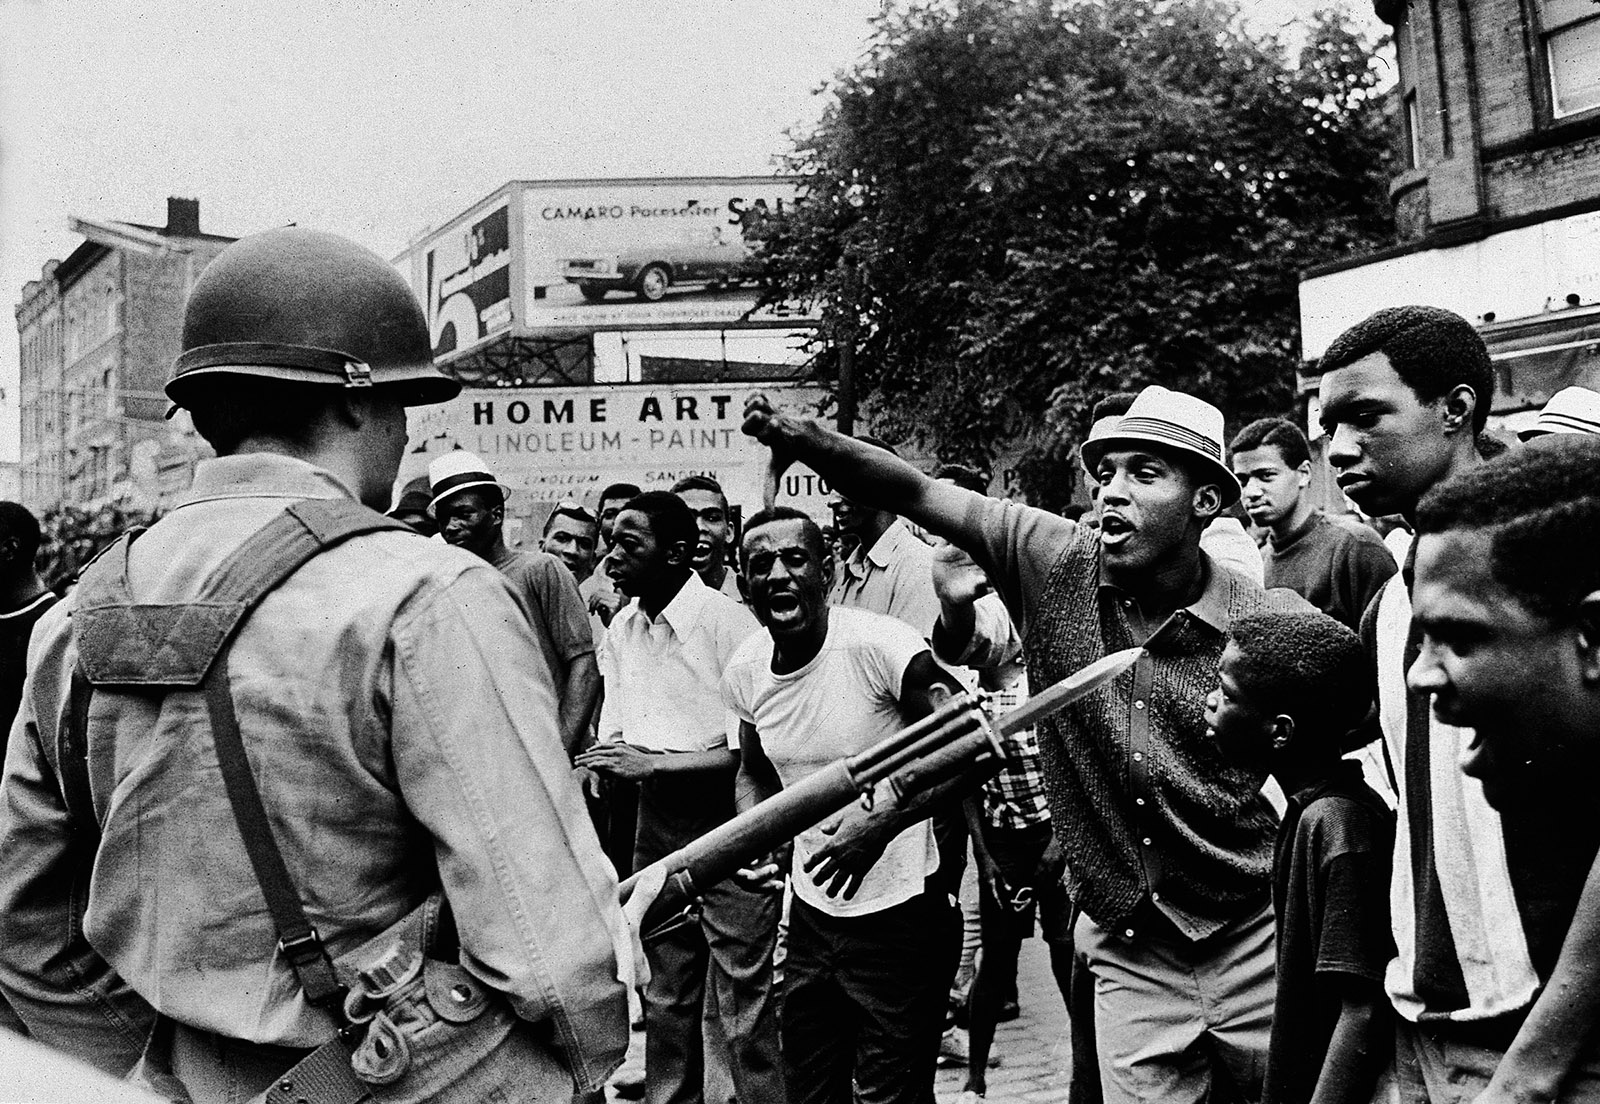 A National Guard member and protesters during the Newark race riots, July 1967